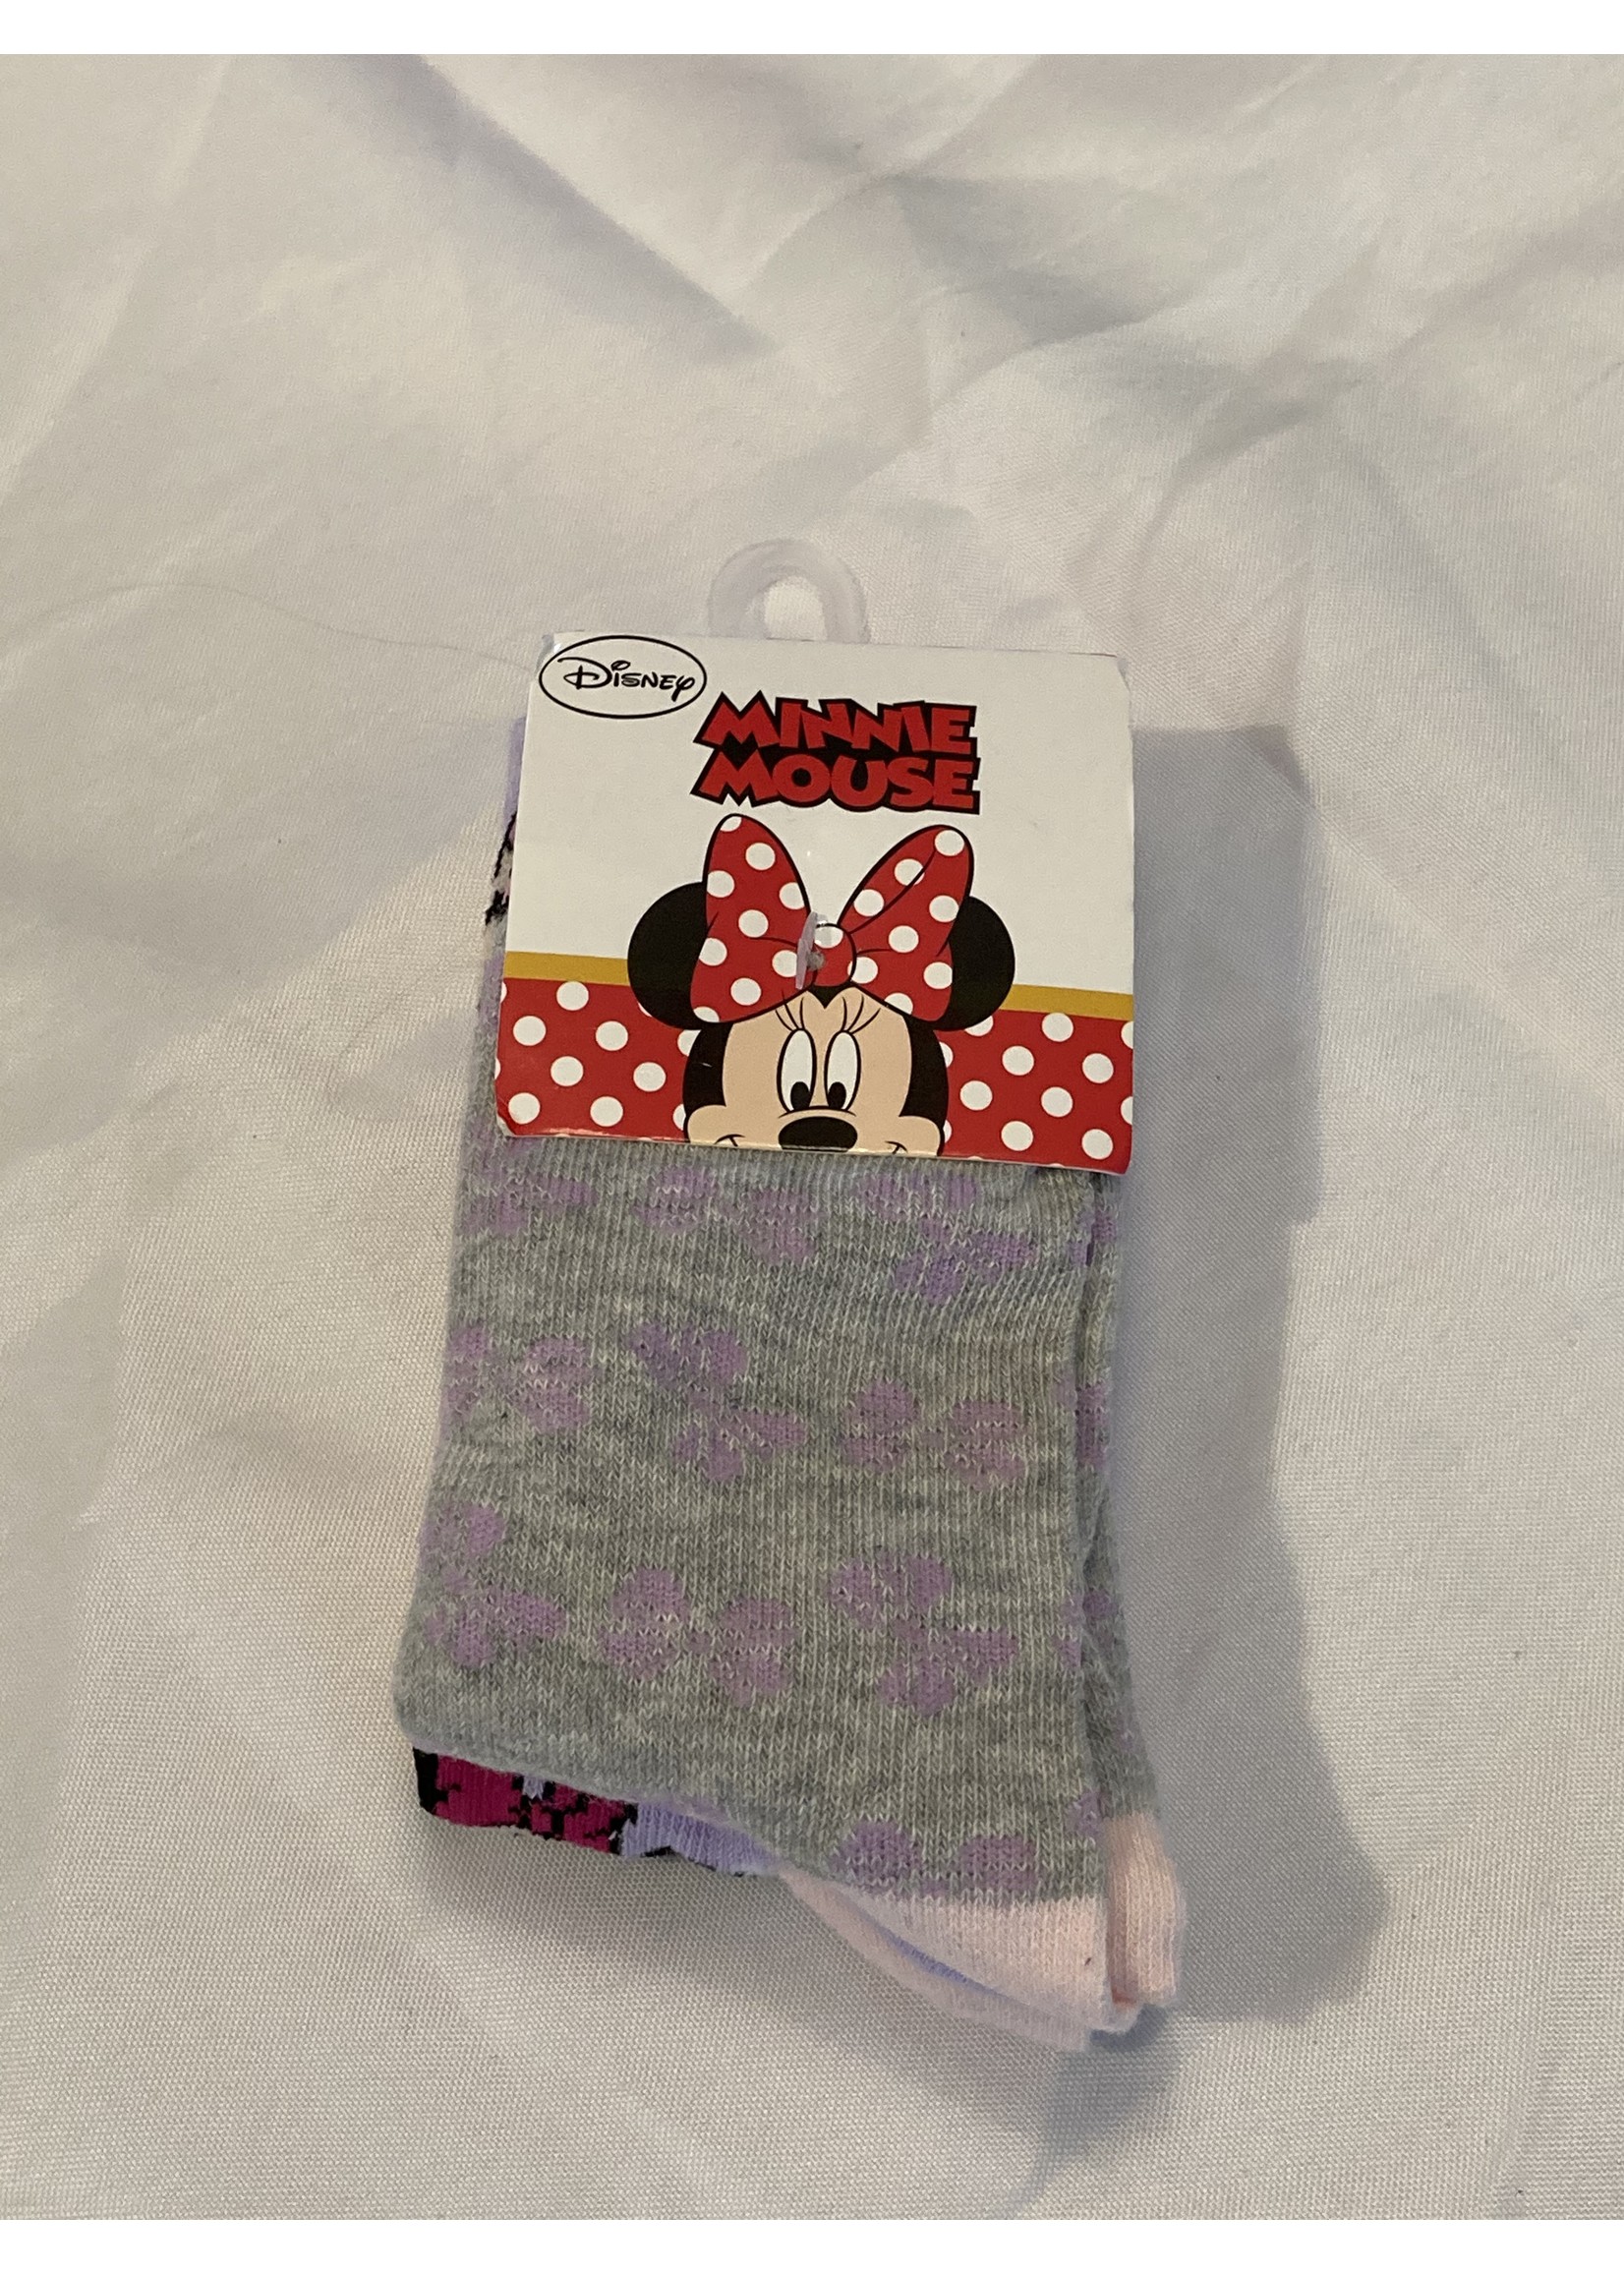 Disney Minnie Mouse socks from Disney 3 pack